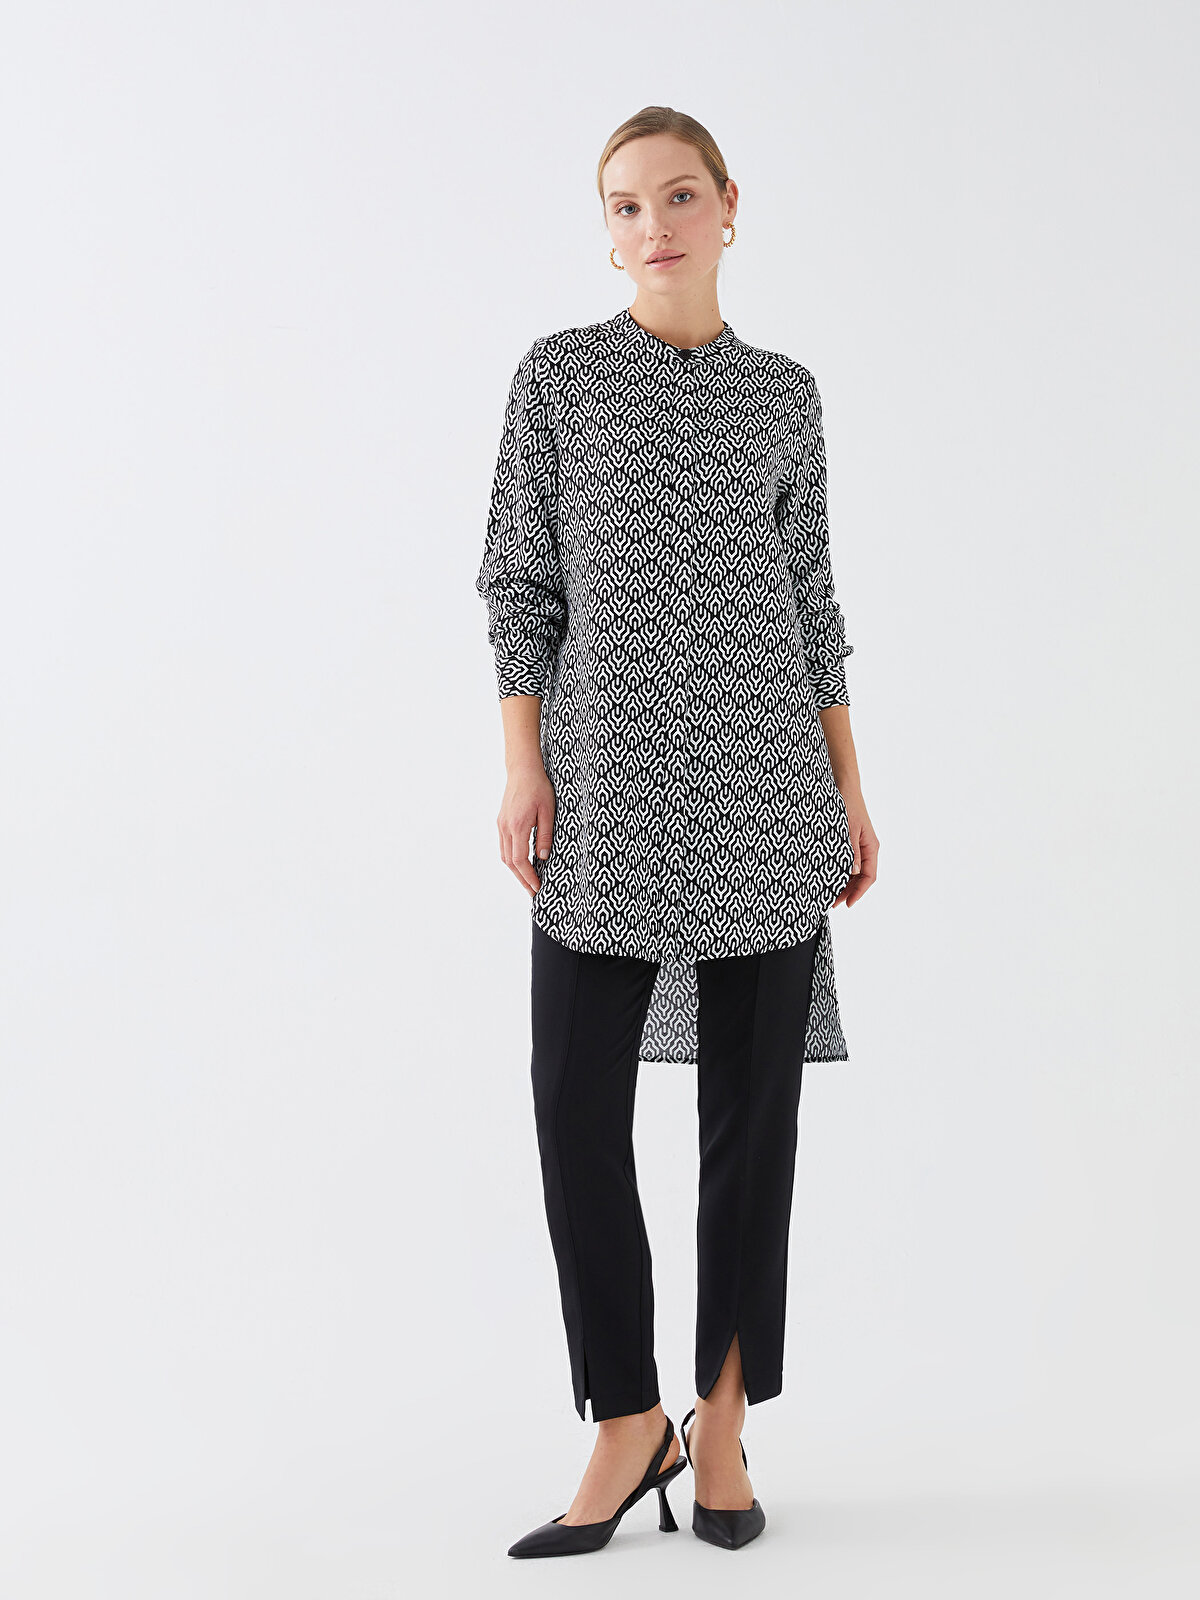 Women's Tunic With Print Collar Patterned Long Sleeve -S38444Z8 